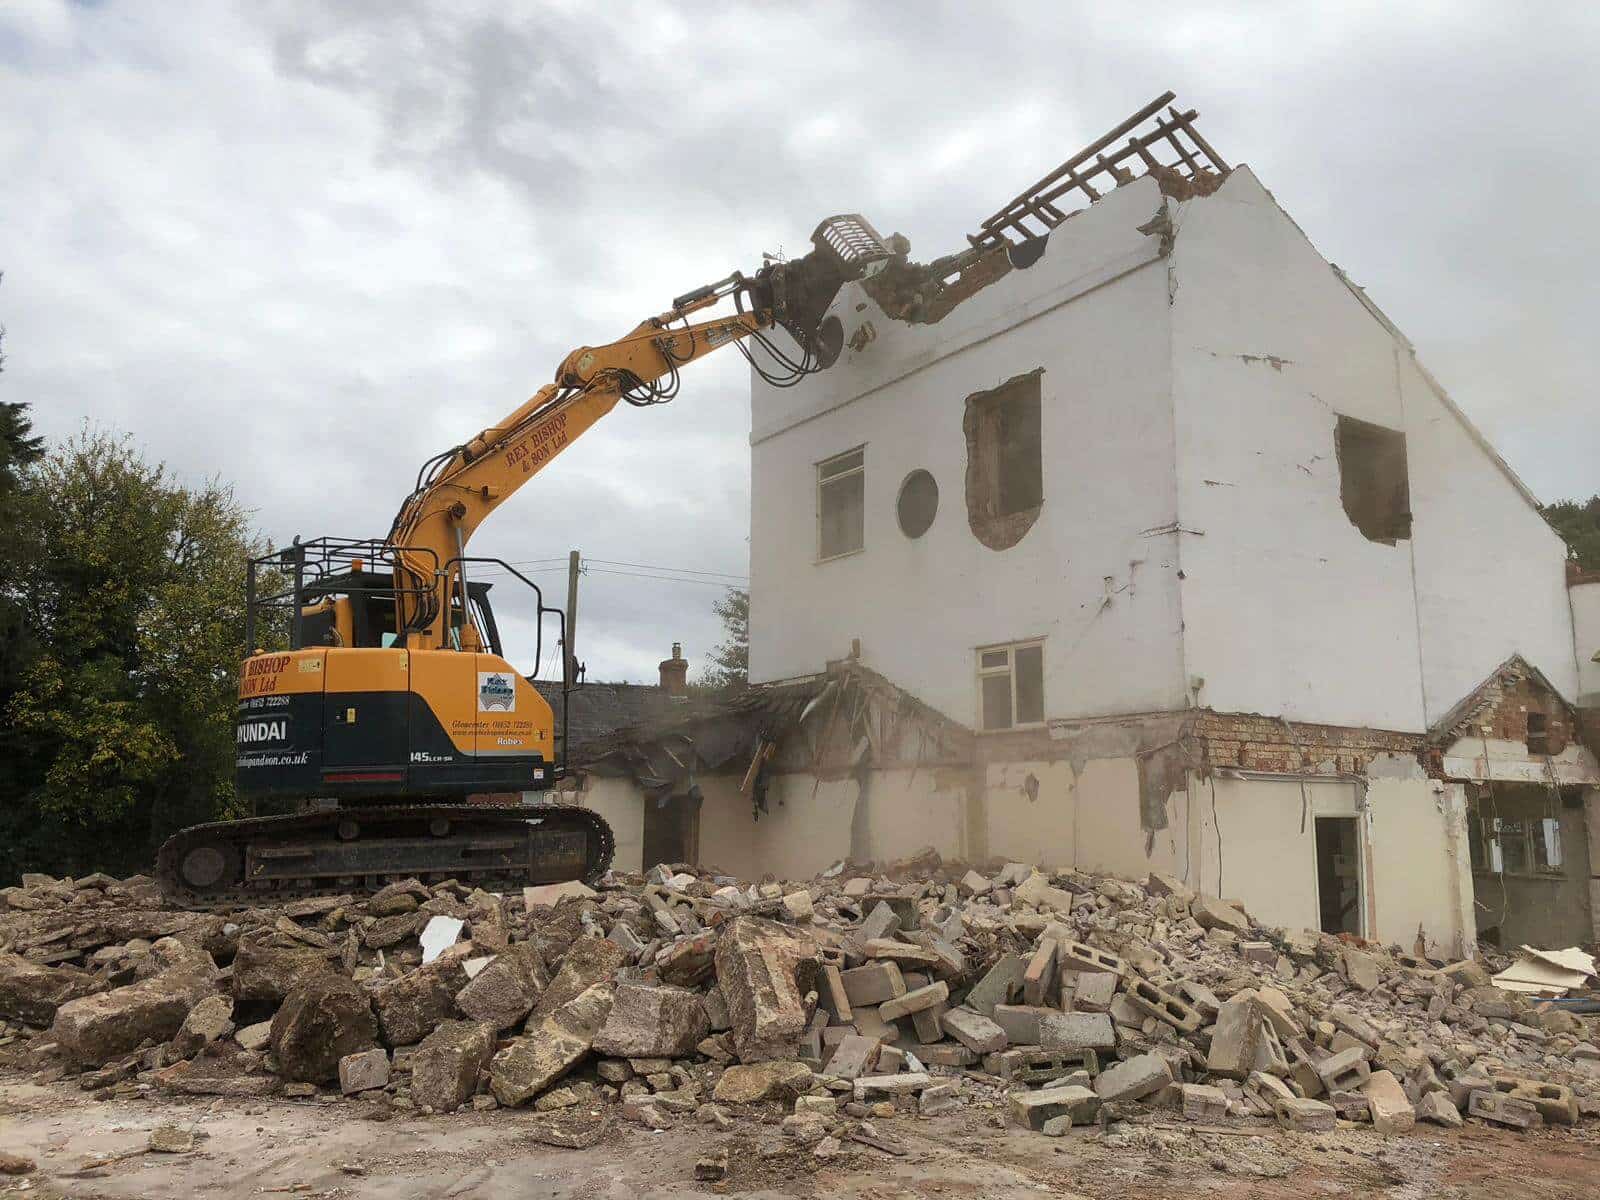 Digger ripping of the roof of an abandoned building